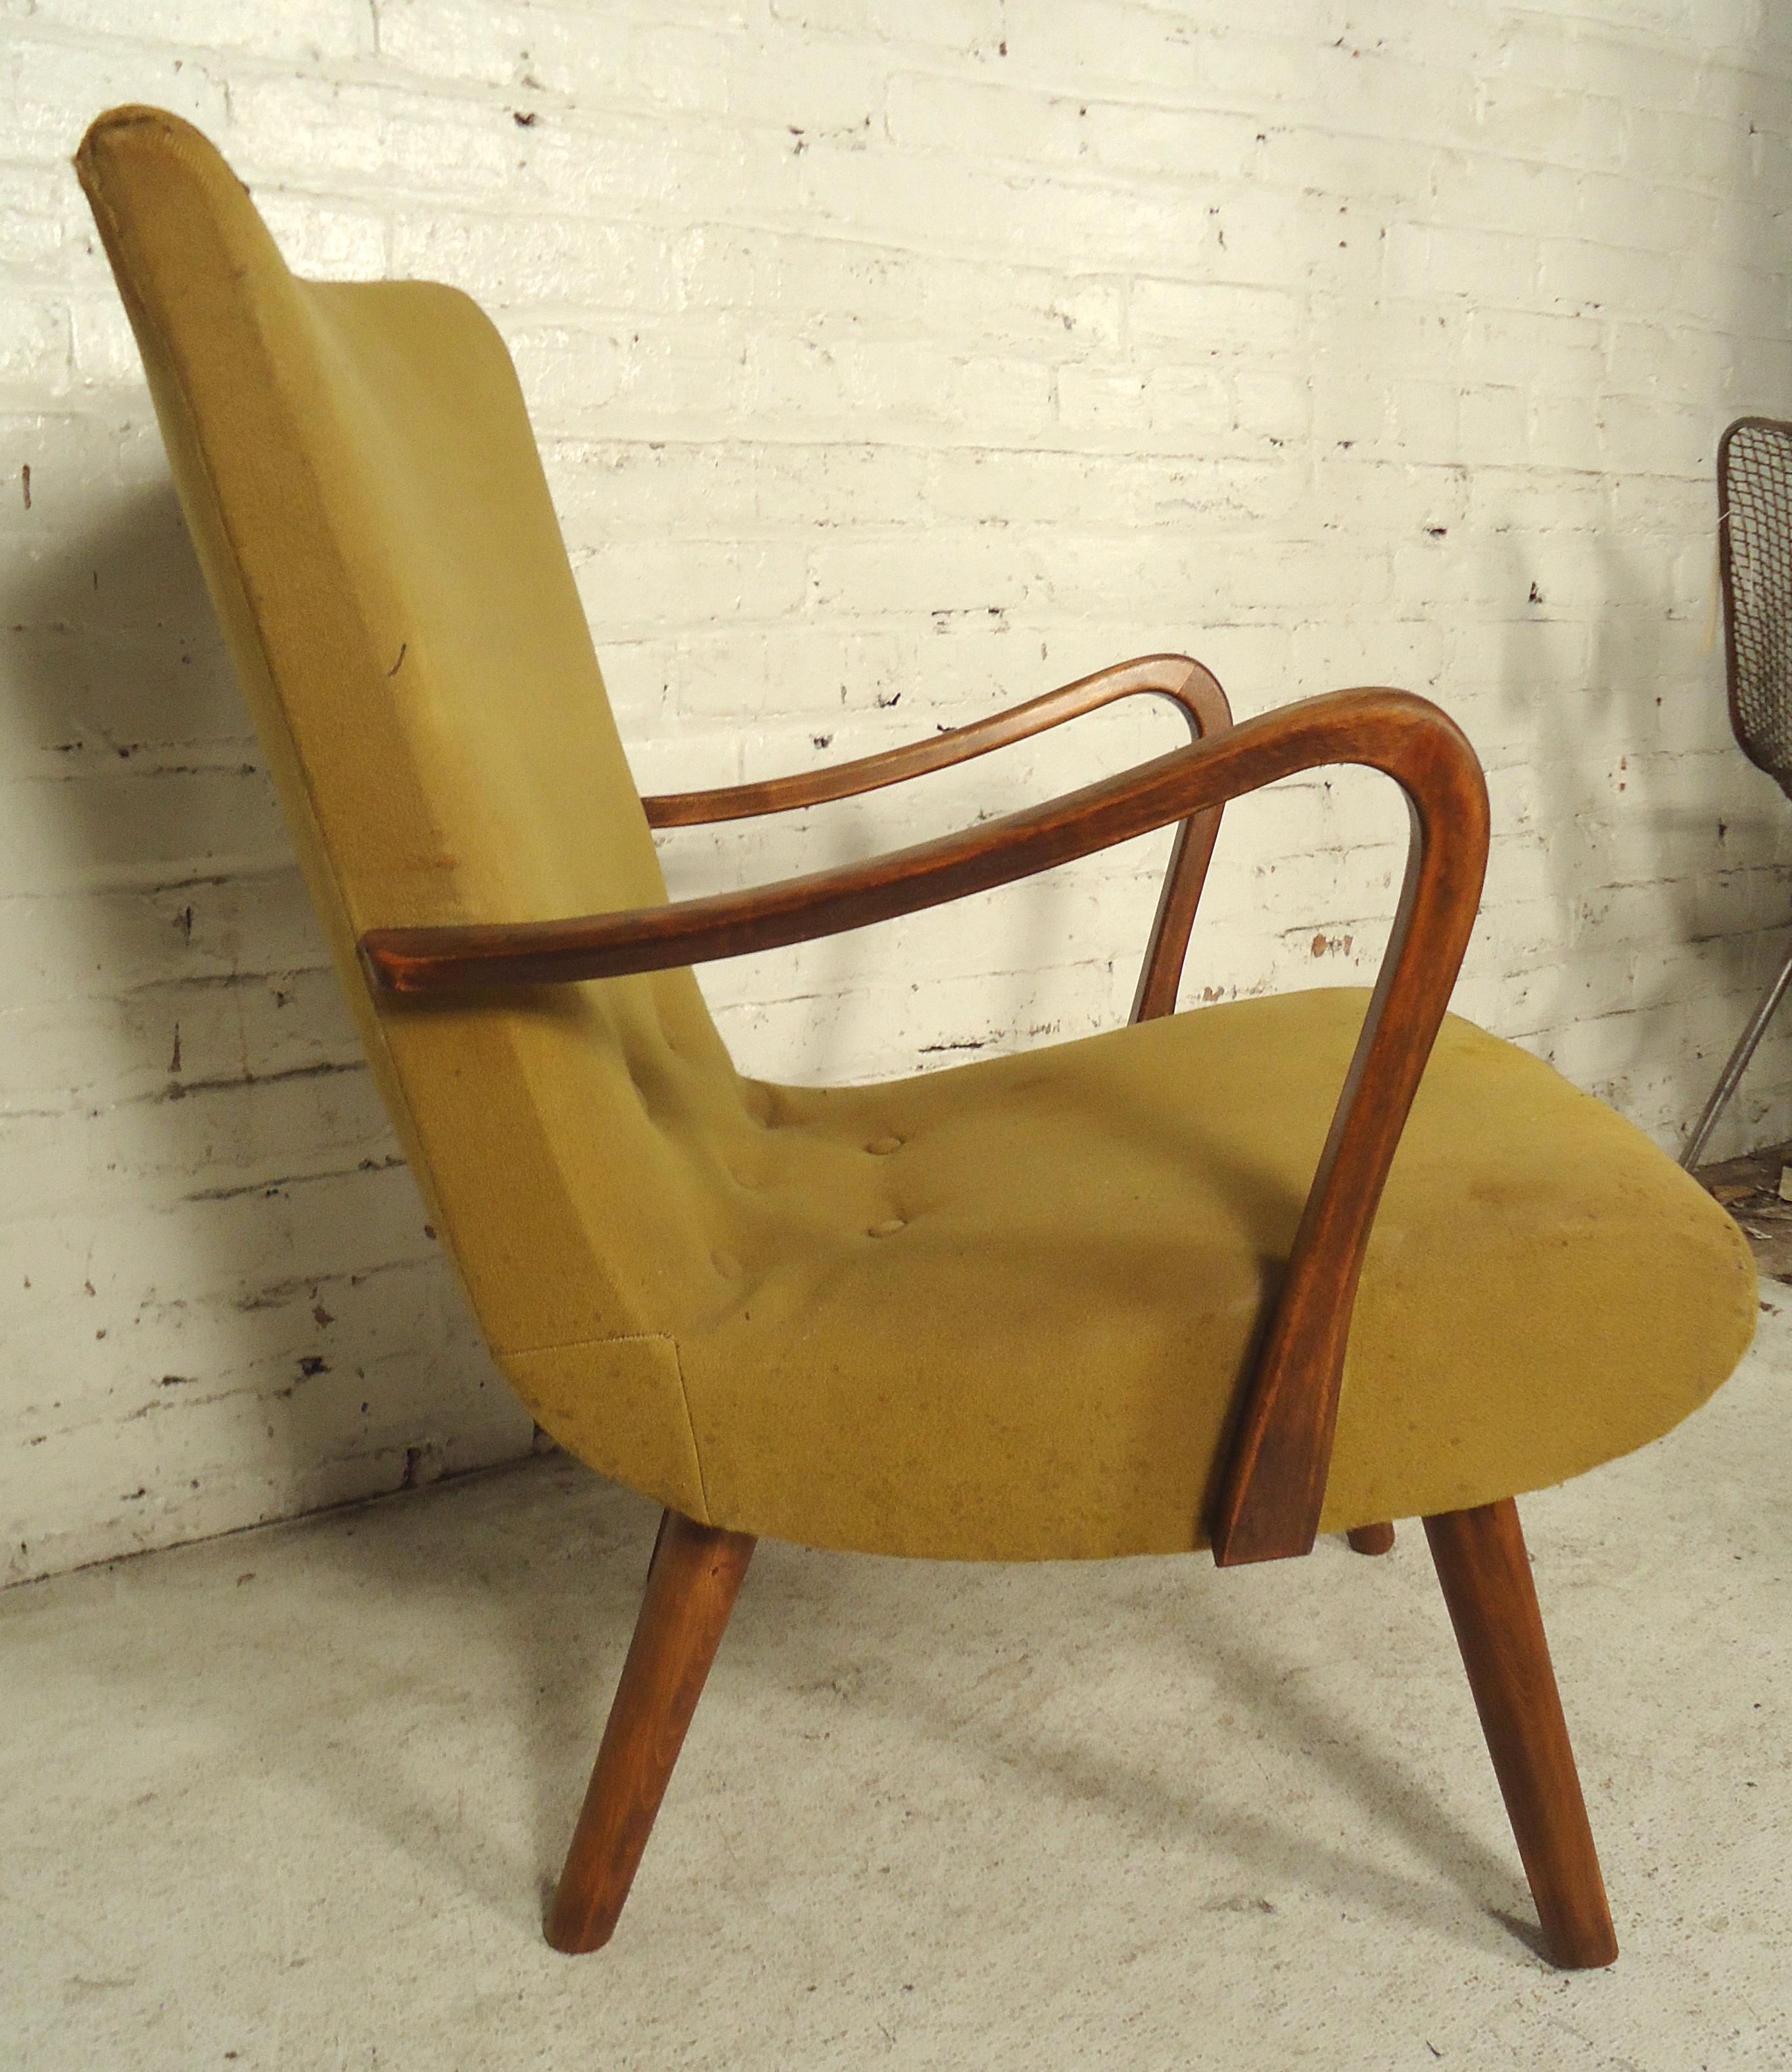 Vintage modern lounge chair with walnut arms. Great modern style shape.
(Please confirm item location - NY or NJ - with dealer).
 